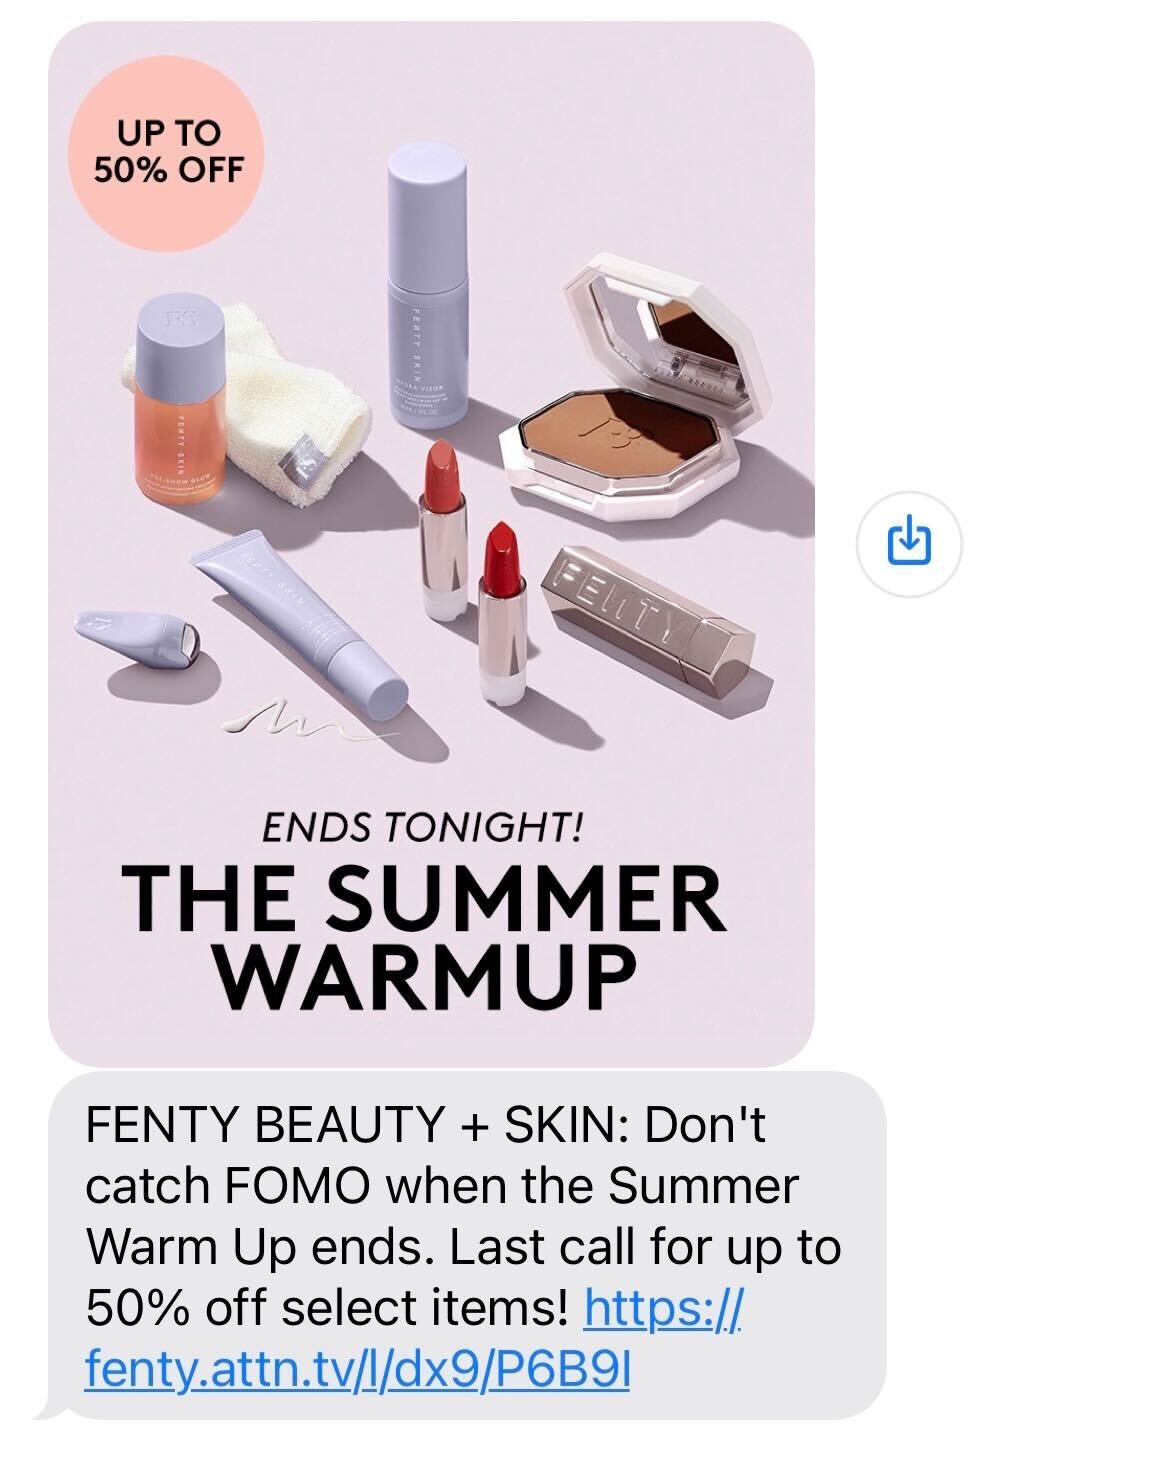 SMS text message from Fenty Beauty offering a limited-time promotion. The message incorporating casual language like "FOMO," to evoke a casual tone. 